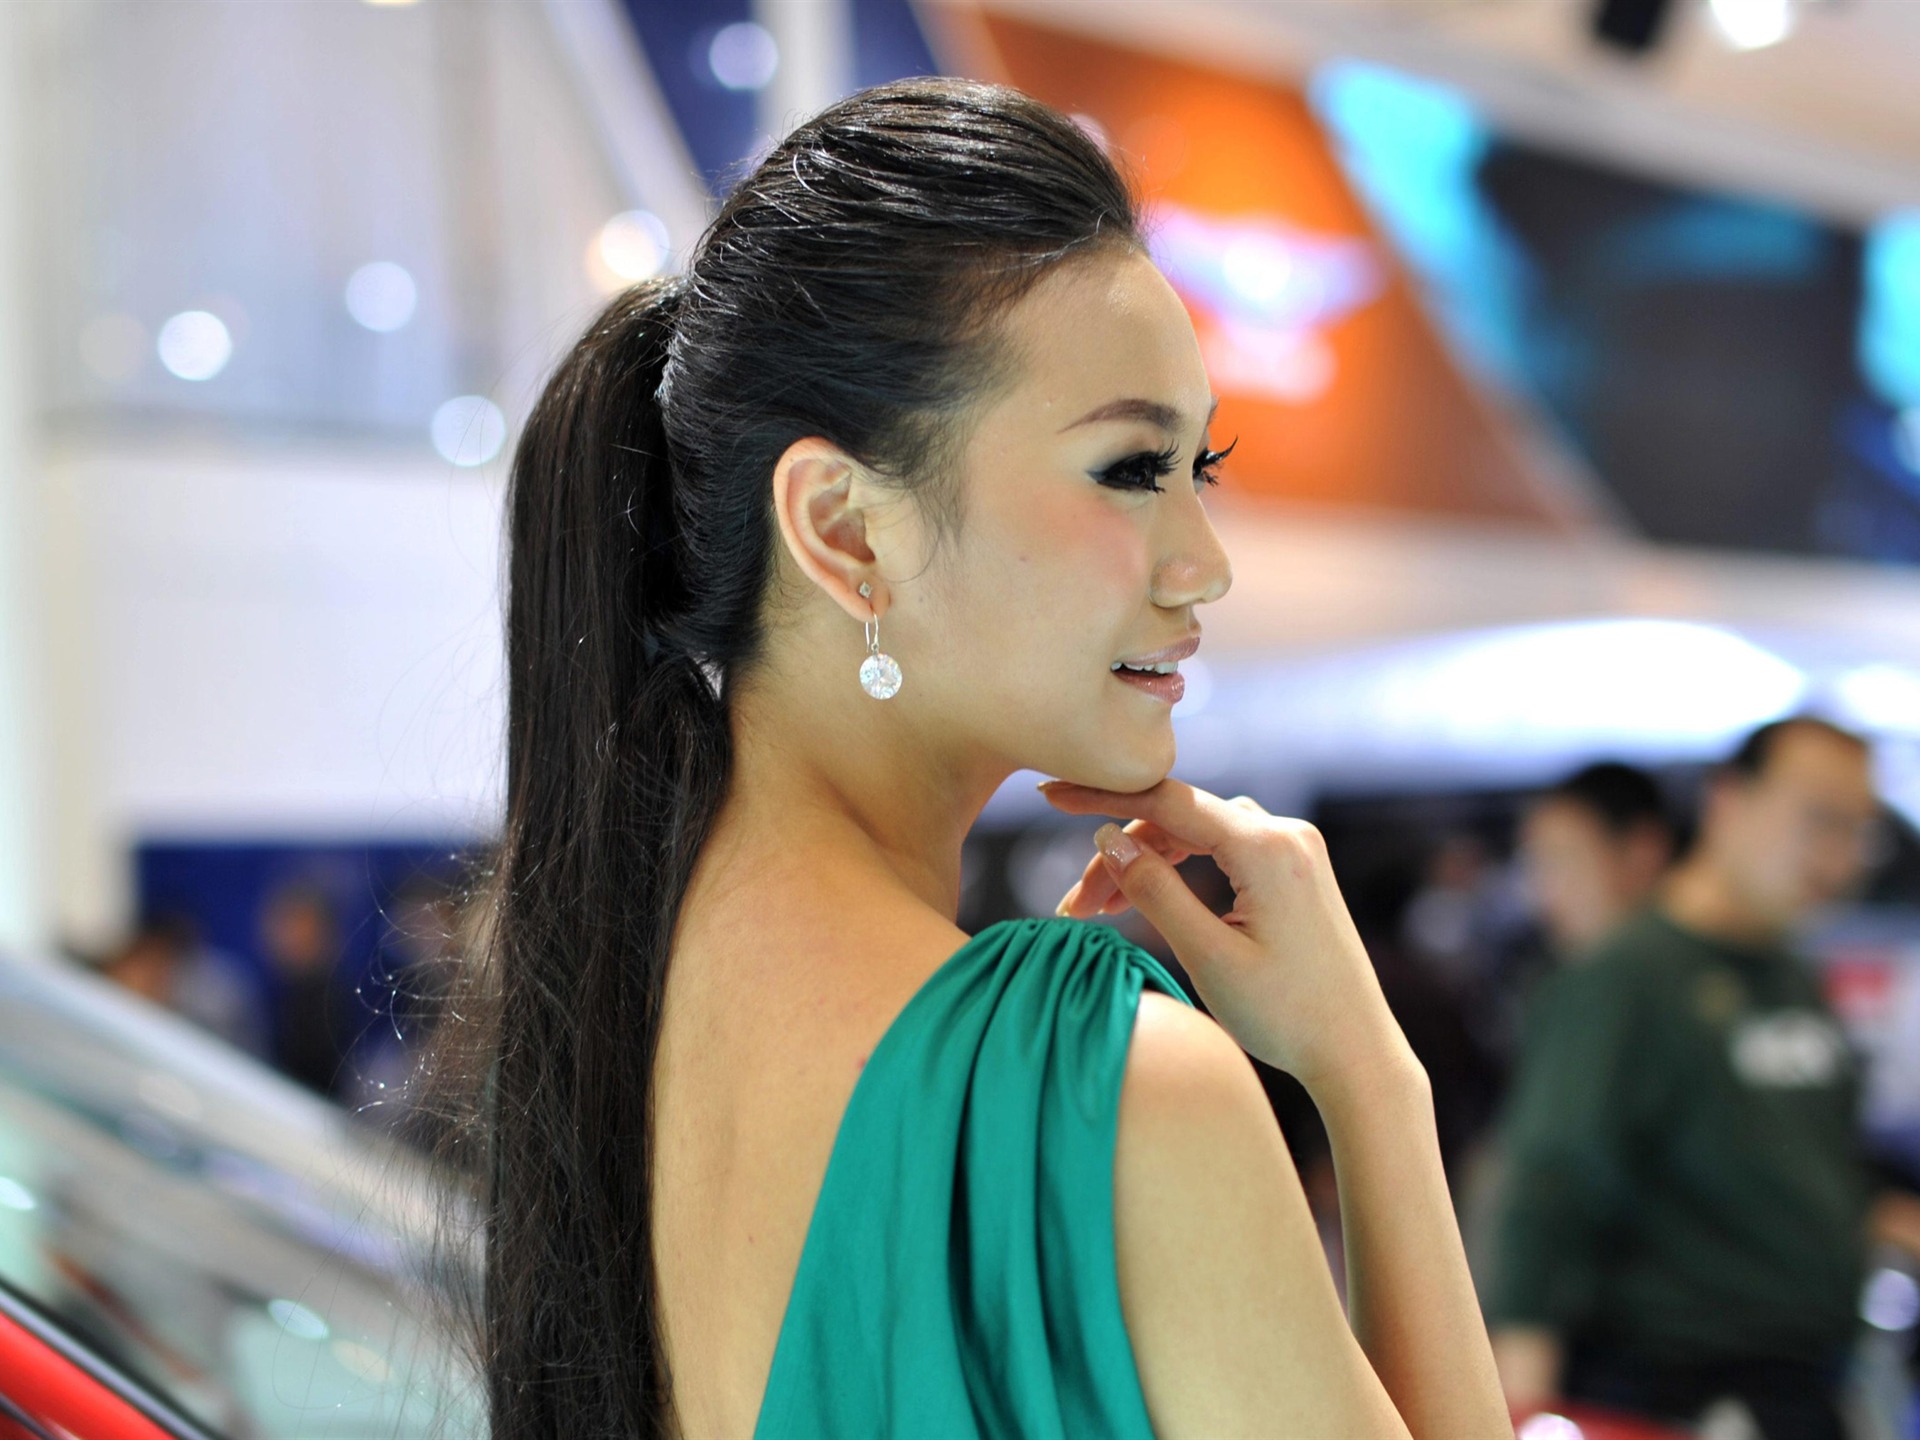 2010 Beijing Auto Show beauty (Kuei-east of the first works) #4 - 1920x1440